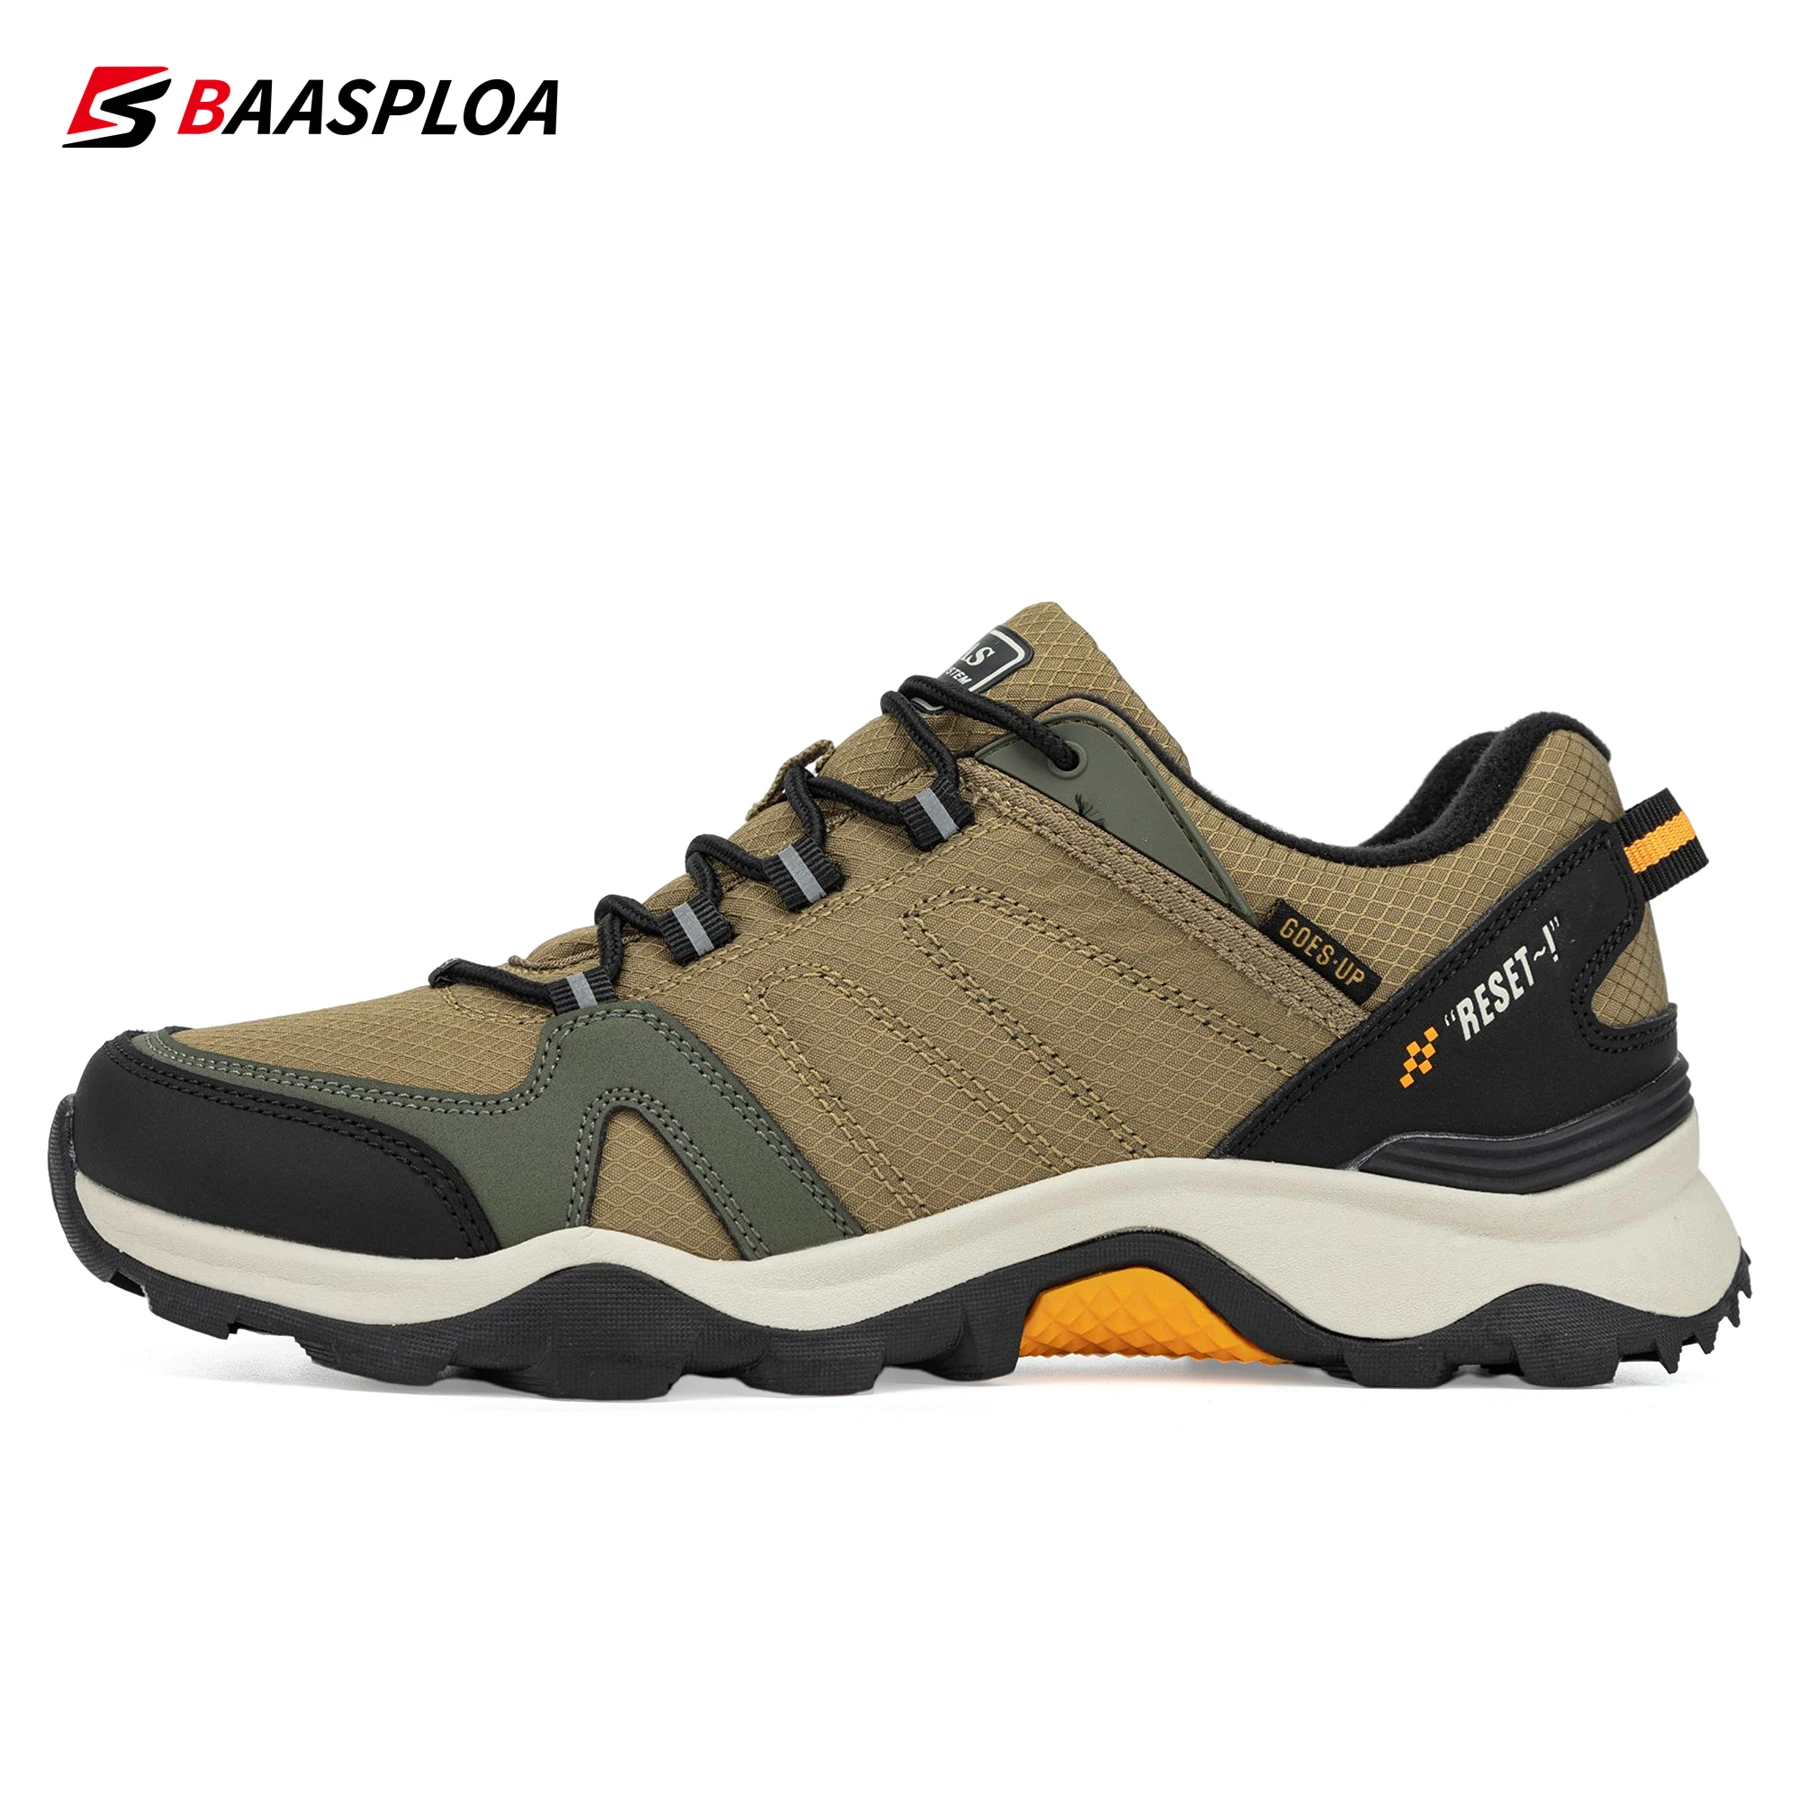 

Baasploa 2022 Men's New Hiking Shoes Non-slip Wear-resistant Outdoor Travel Shoes Fashion Leather Comfortable Climbing Shoes